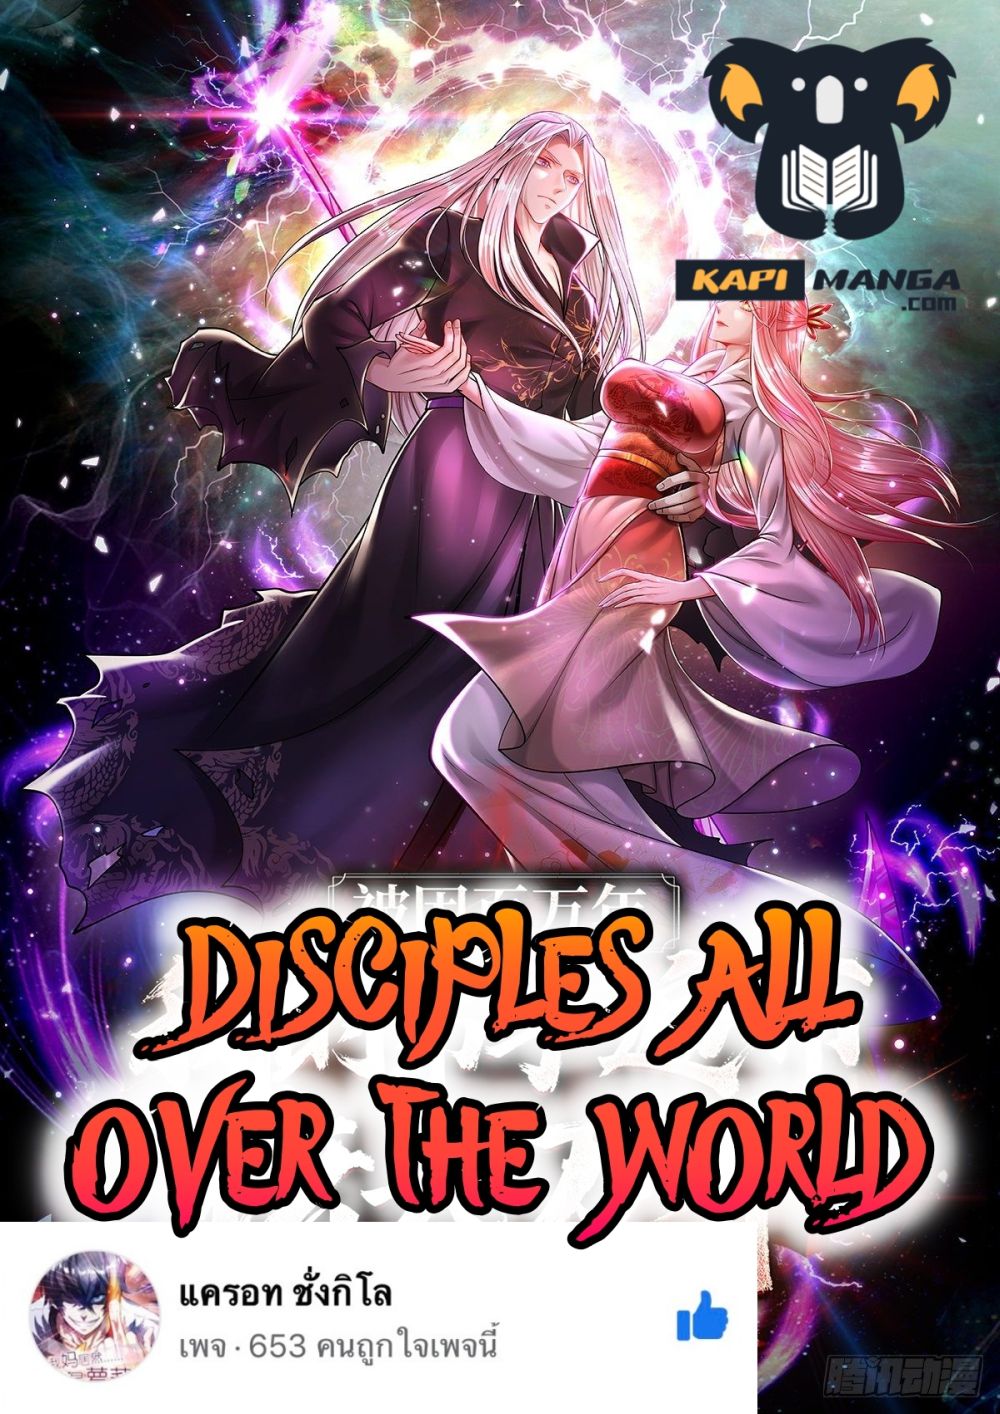 Disciples All Over the World à¸à¸­à¸à¸à¸µà¹ 36 (1)